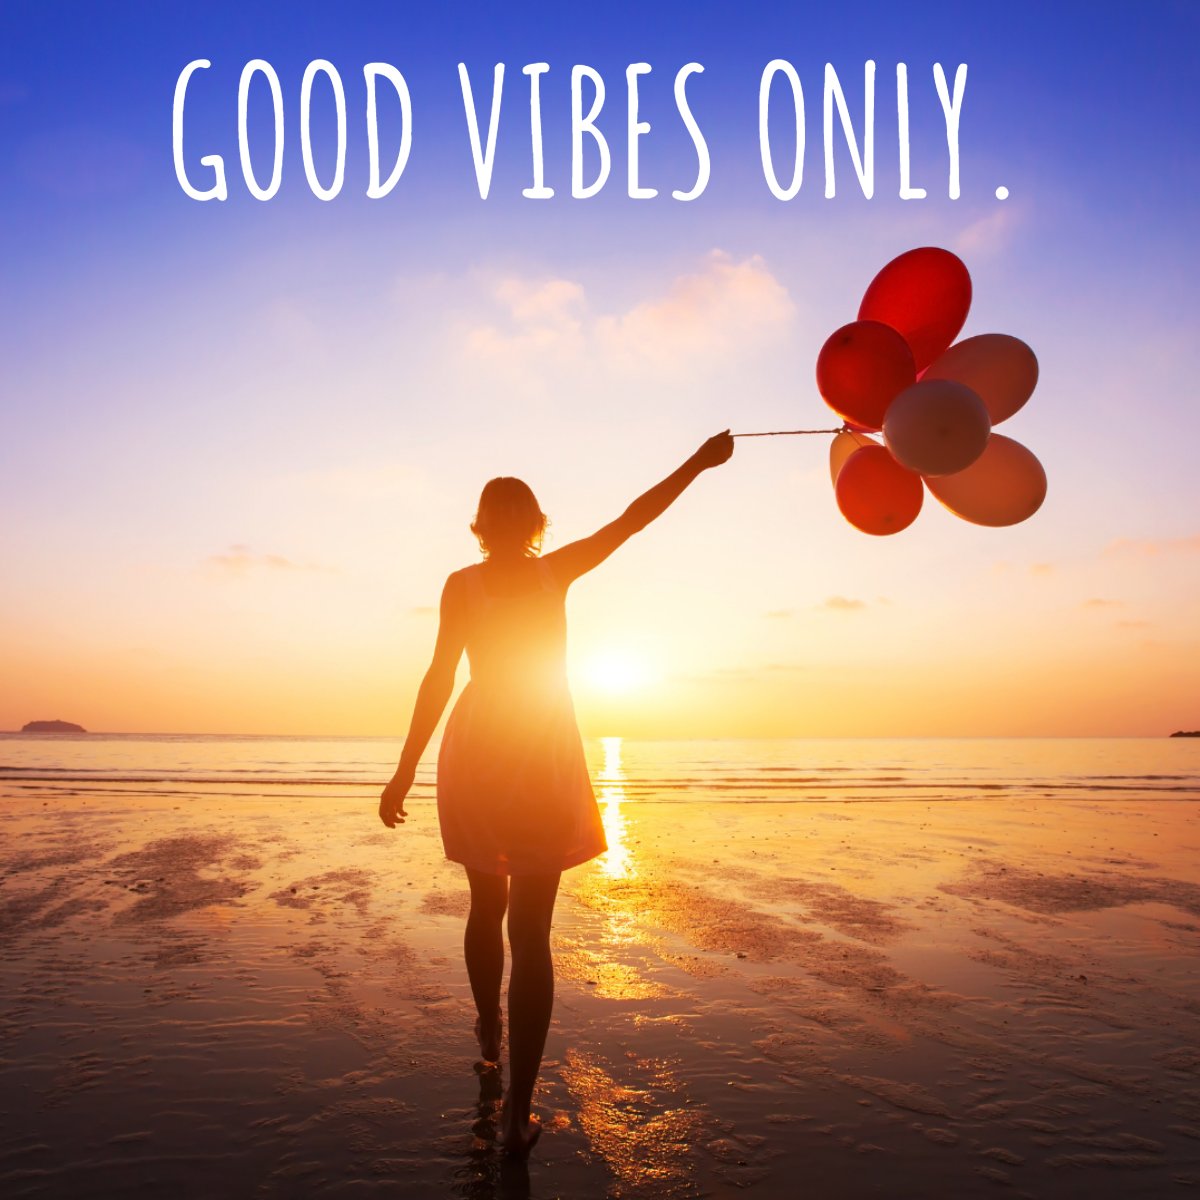 Good Vibes Only...🙆✌️

#goodvibesonly✌️ #vibes #goodvibes #positivevibes #goodquote #goodenergyonly #instagood
 #emeraldpropertyteam #home #homedecor #realtorswithexperience #homesweethome #interior #exterior #luxuryhomes #homegoals #homedesign #helpfulhits